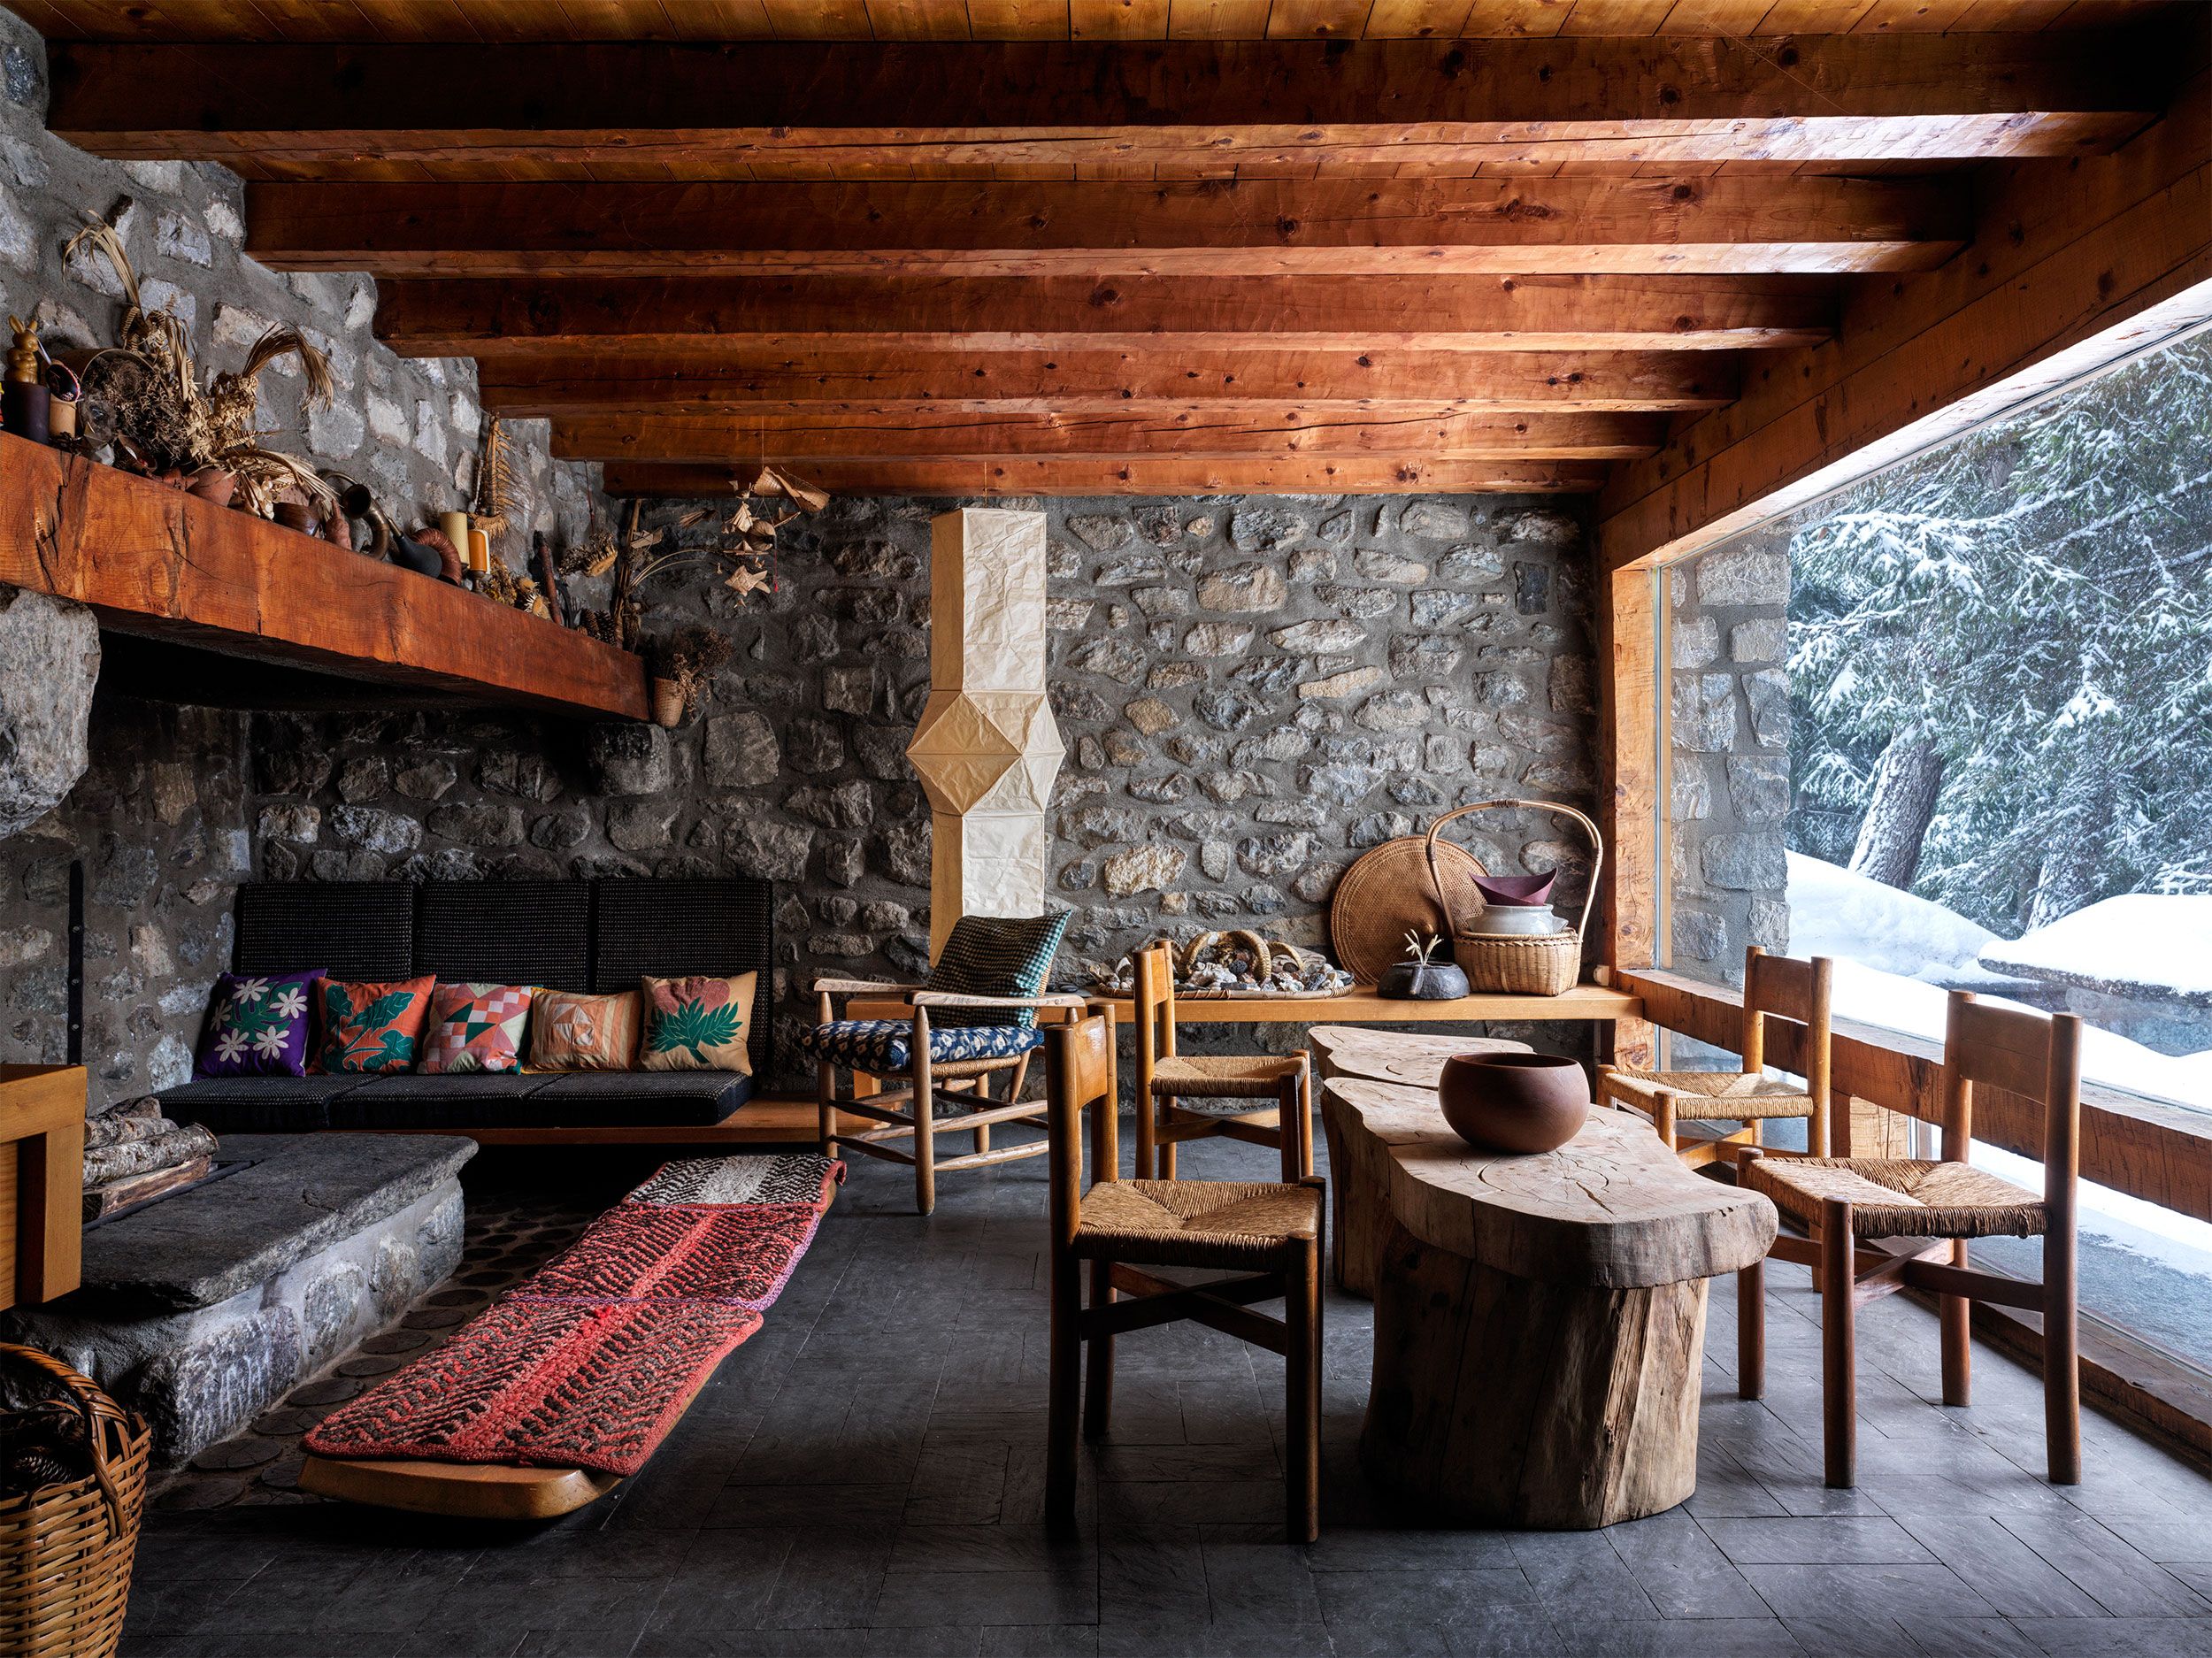 An Insider's Tour of the French Ski Resort Charlotte Perriand